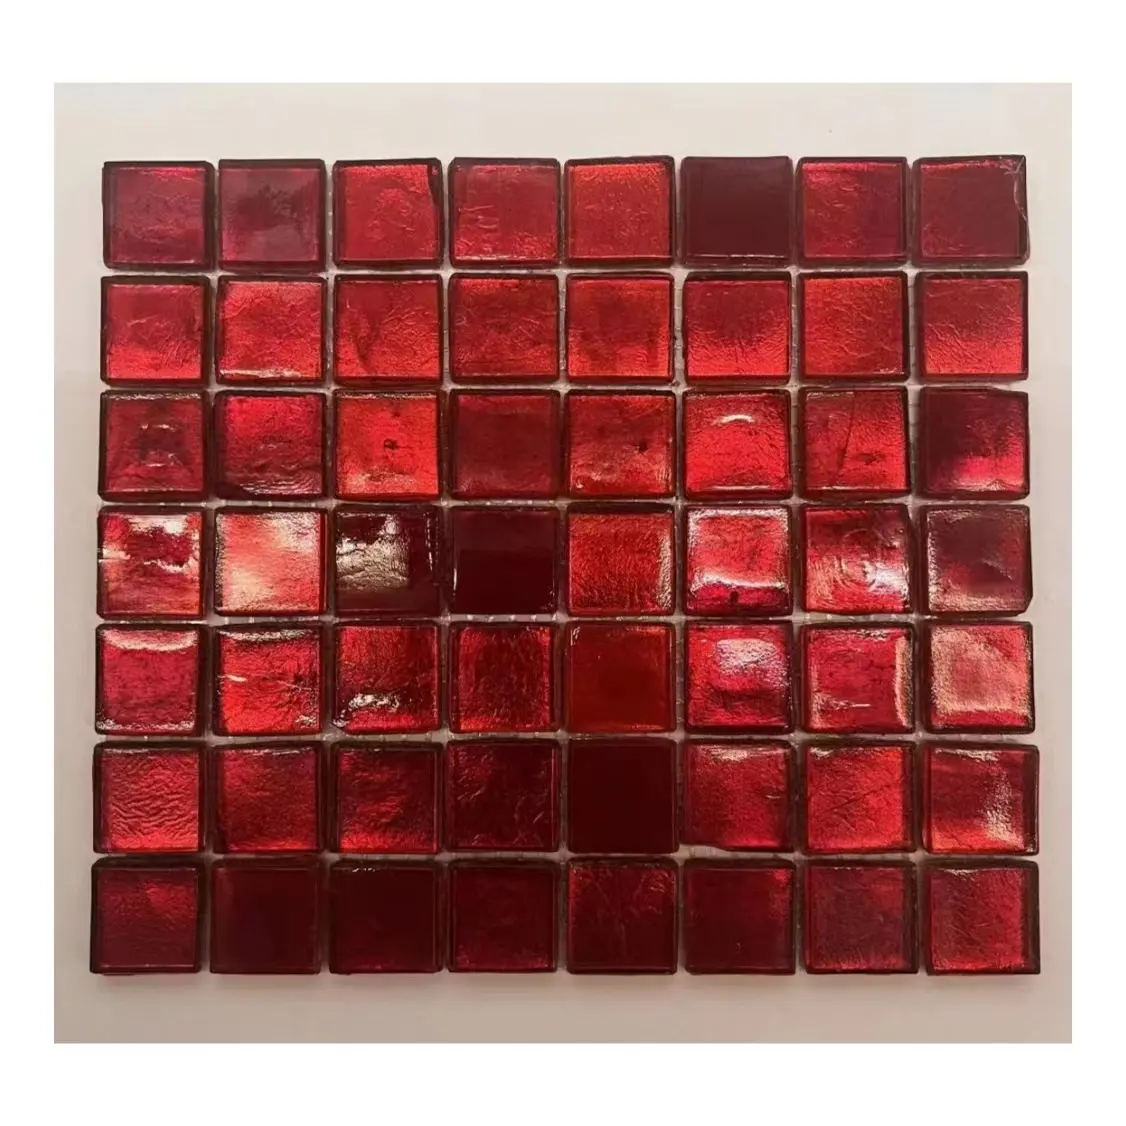 Wholesale Price High Quality Red Glass Mosaic Tiles For Wall Decor Top-notch Wall Tile Bar Stage Decor